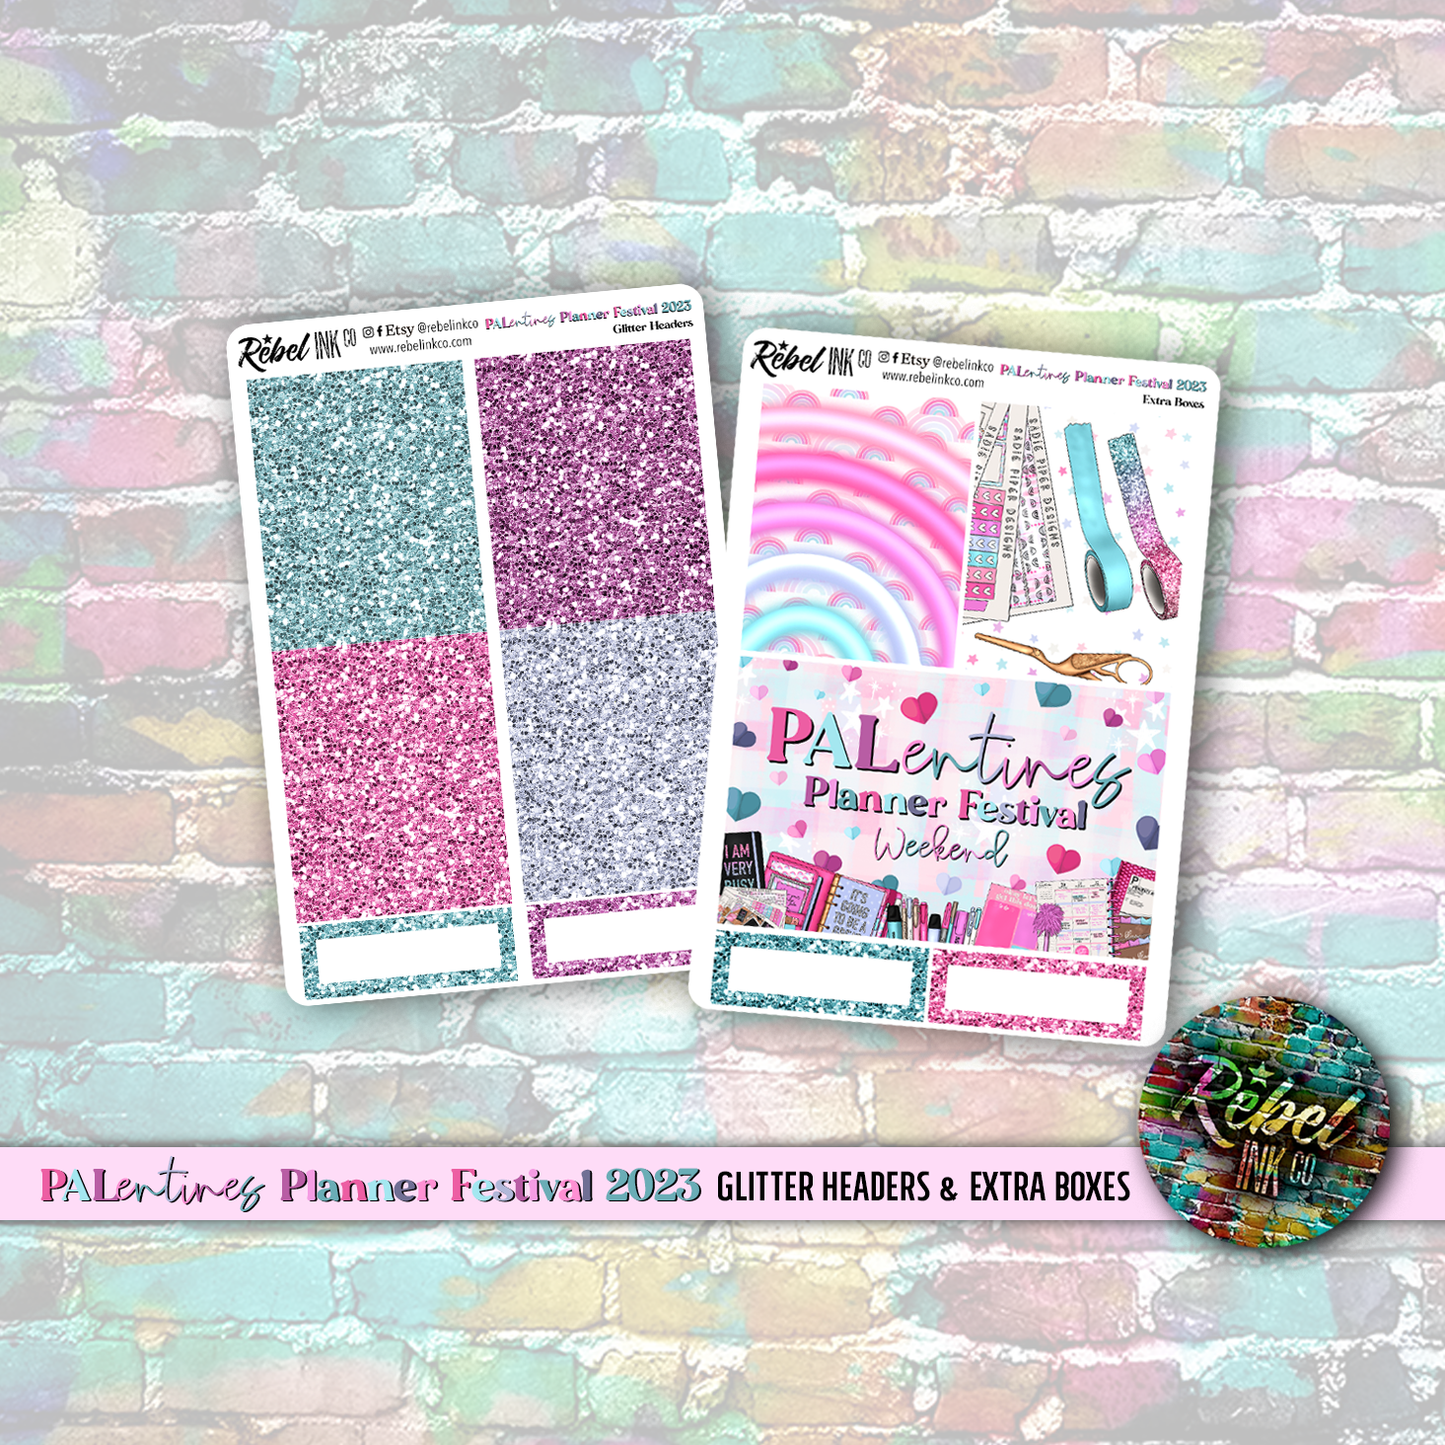 Palentines Planner Festival OFFICIAL - Extra Boxes & Glitter Headers